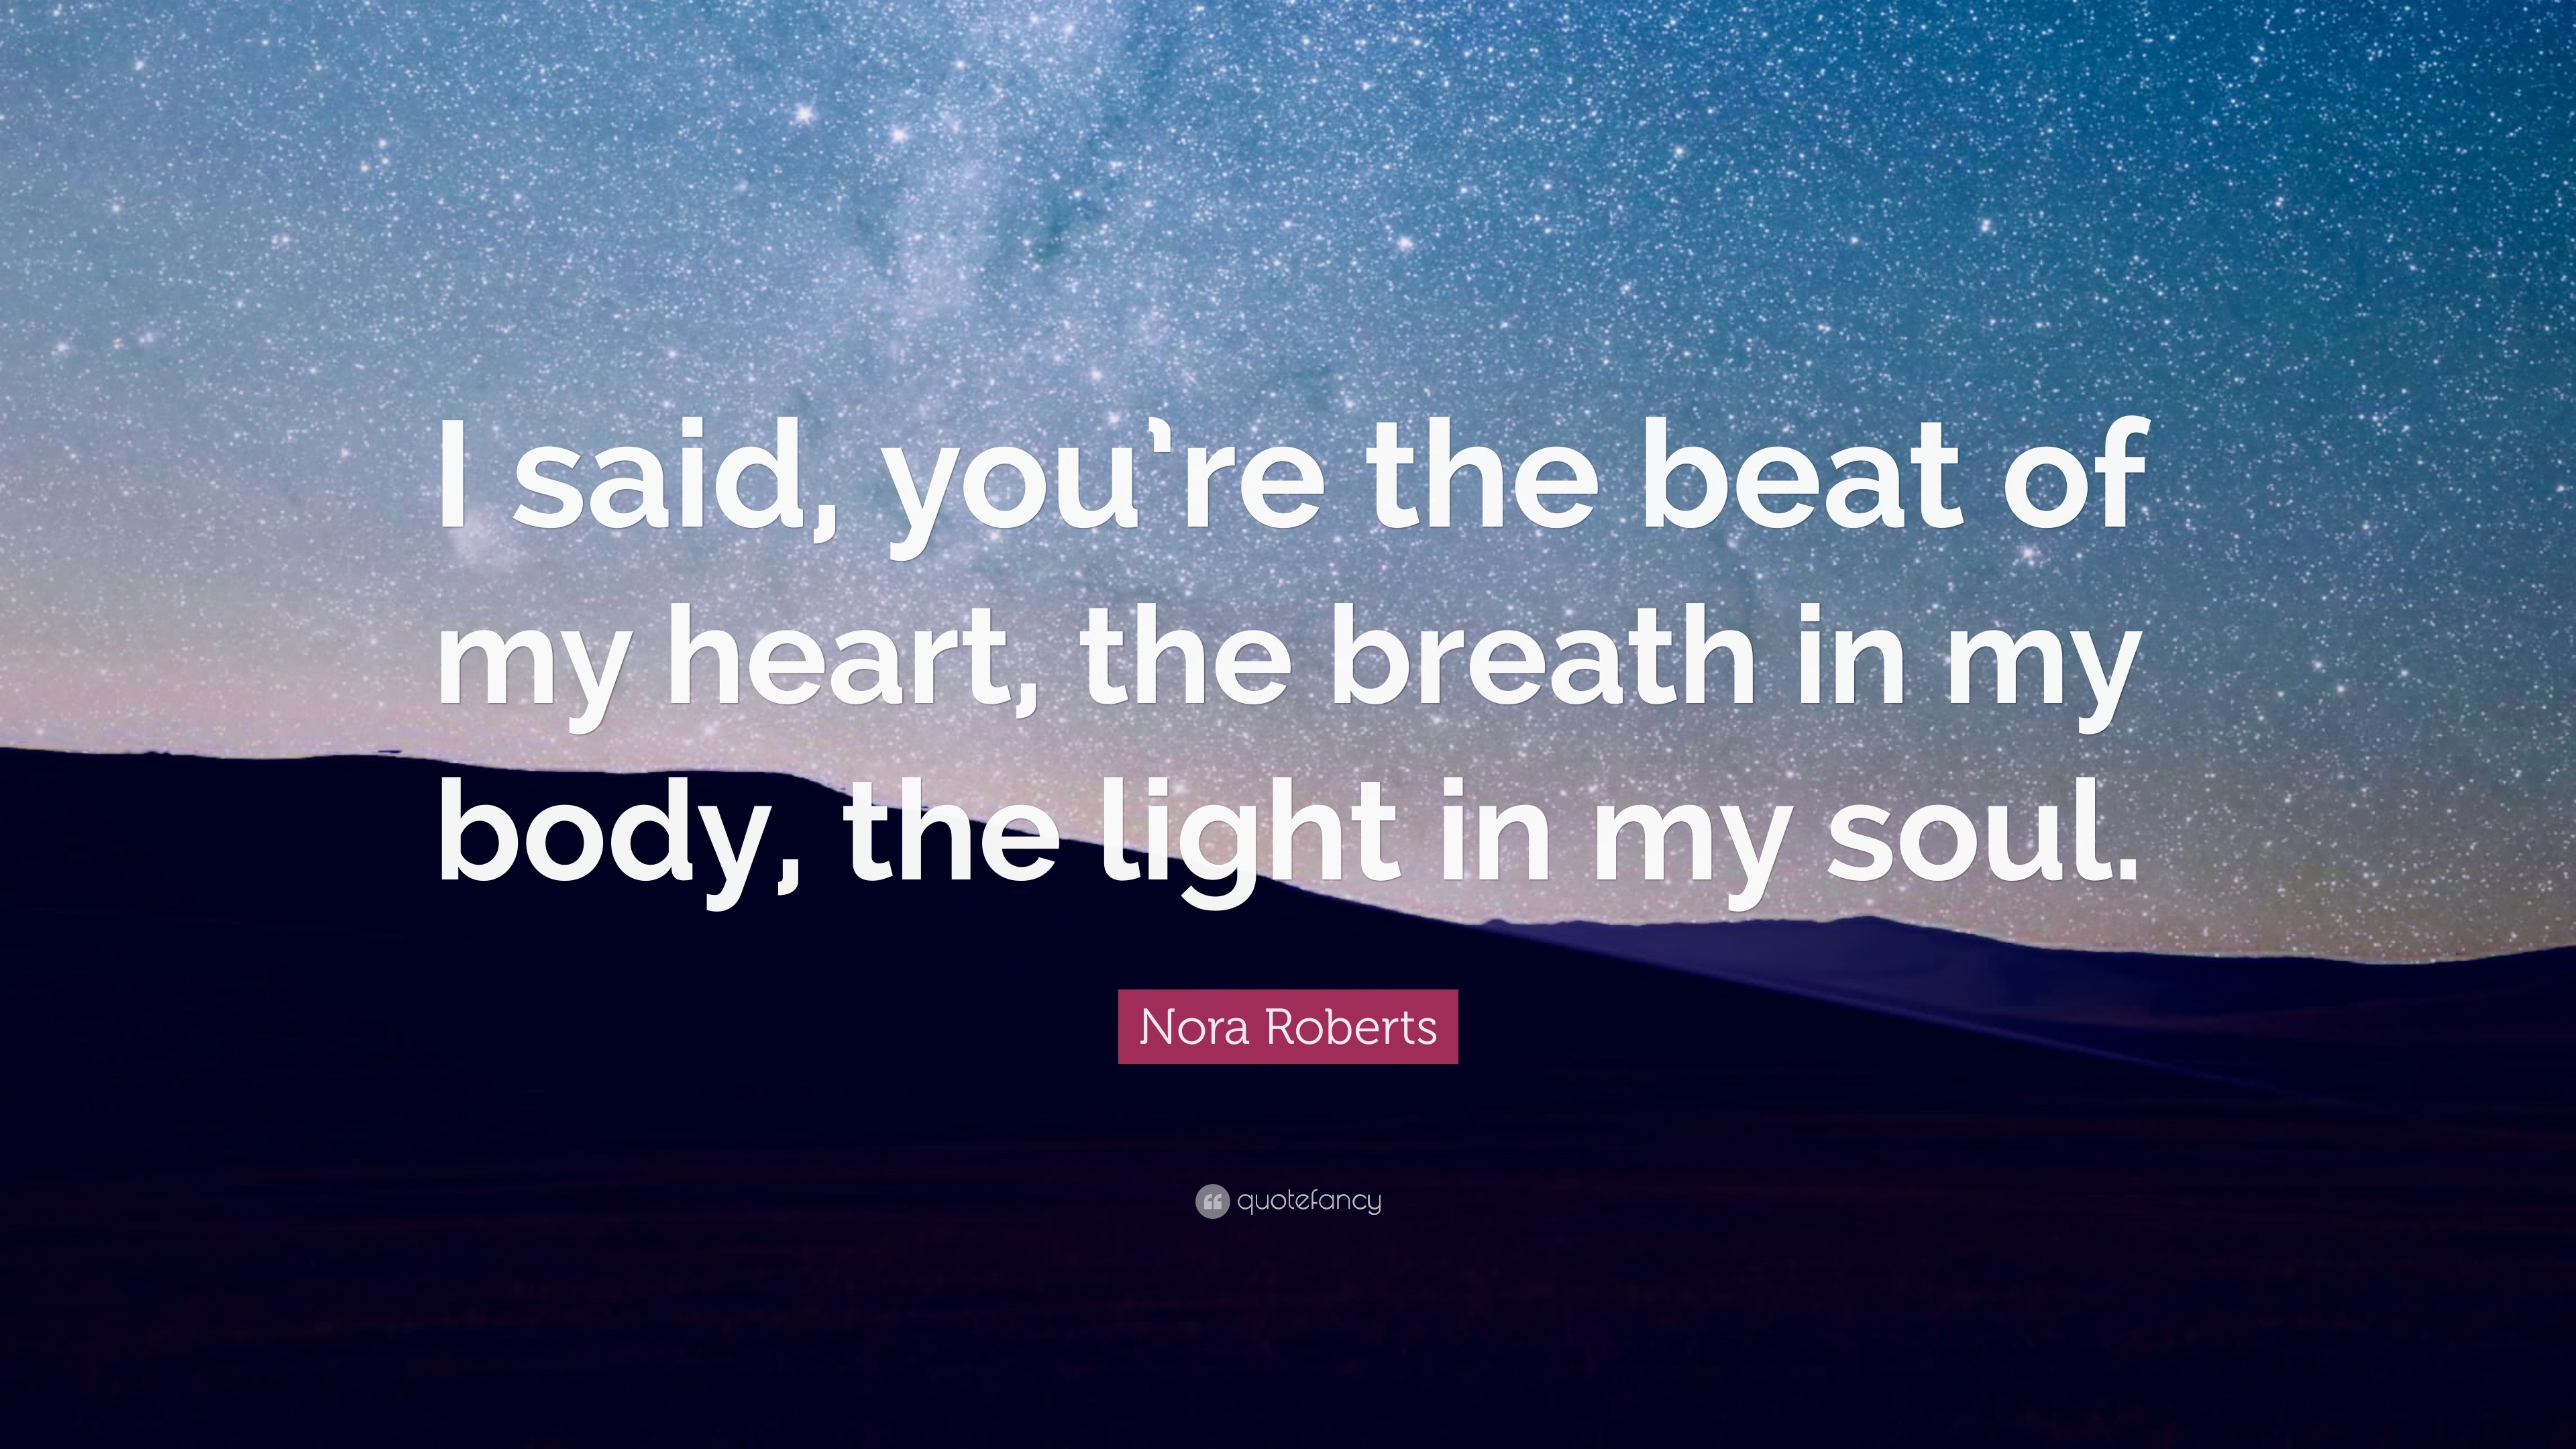 Blot gæld Sprællemand Nora Roberts Quote: “I said, you're the beat of my heart, the breath in my